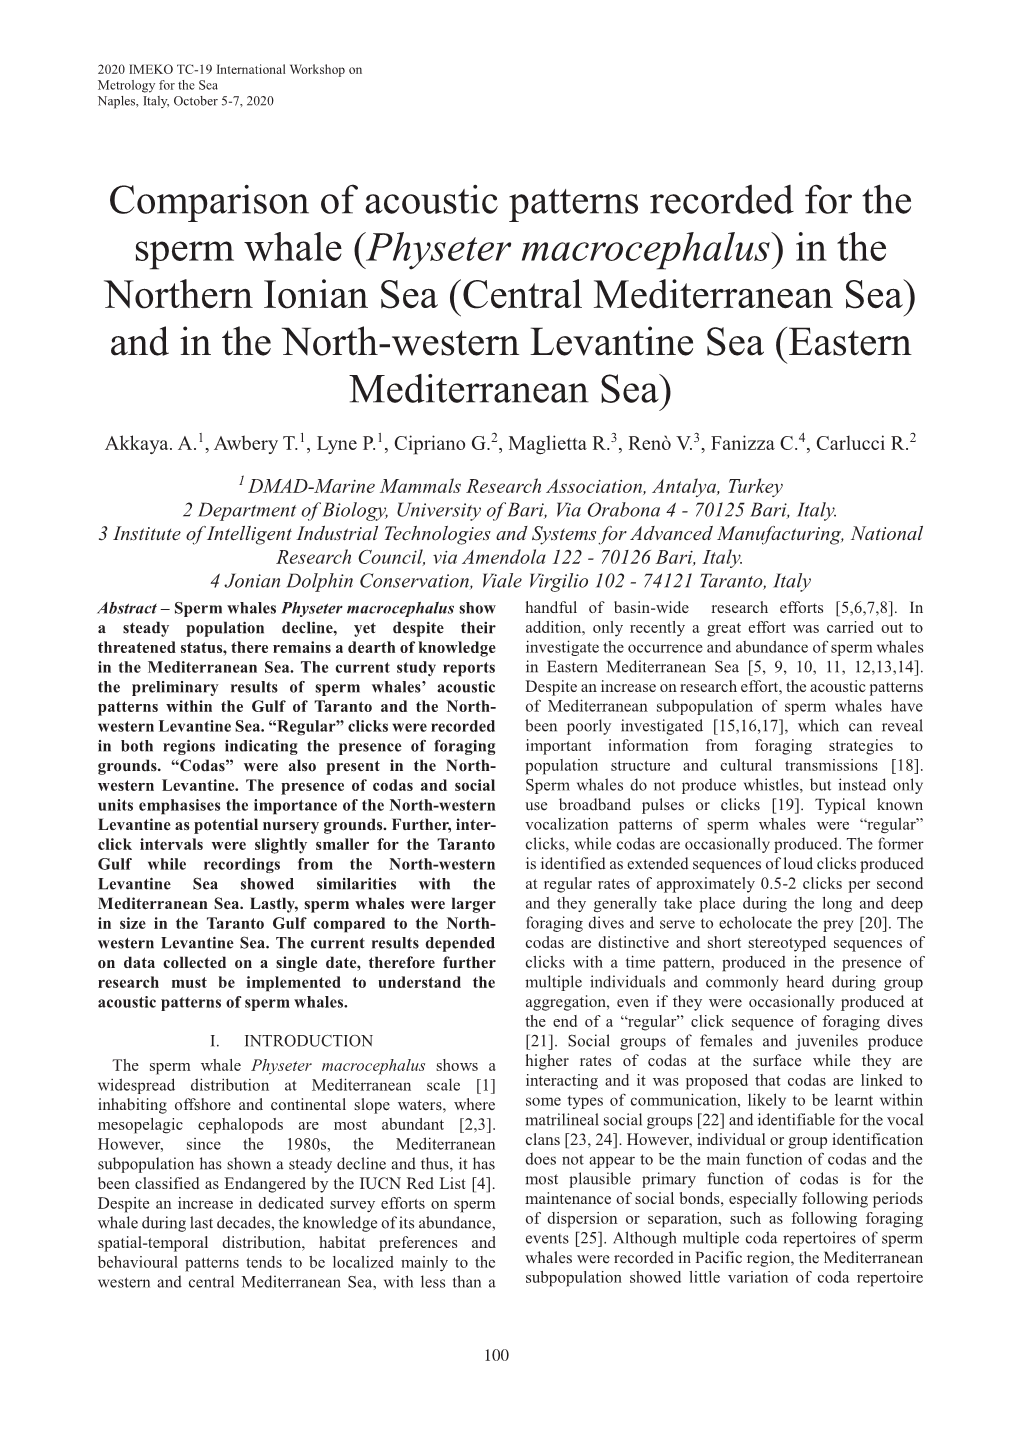 Physeter Macrocephalus) in the Northern Ionian Sea (Central Mediterranean Sea) and in the North-Western Levantine Sea (Eastern Mediterranean Sea)